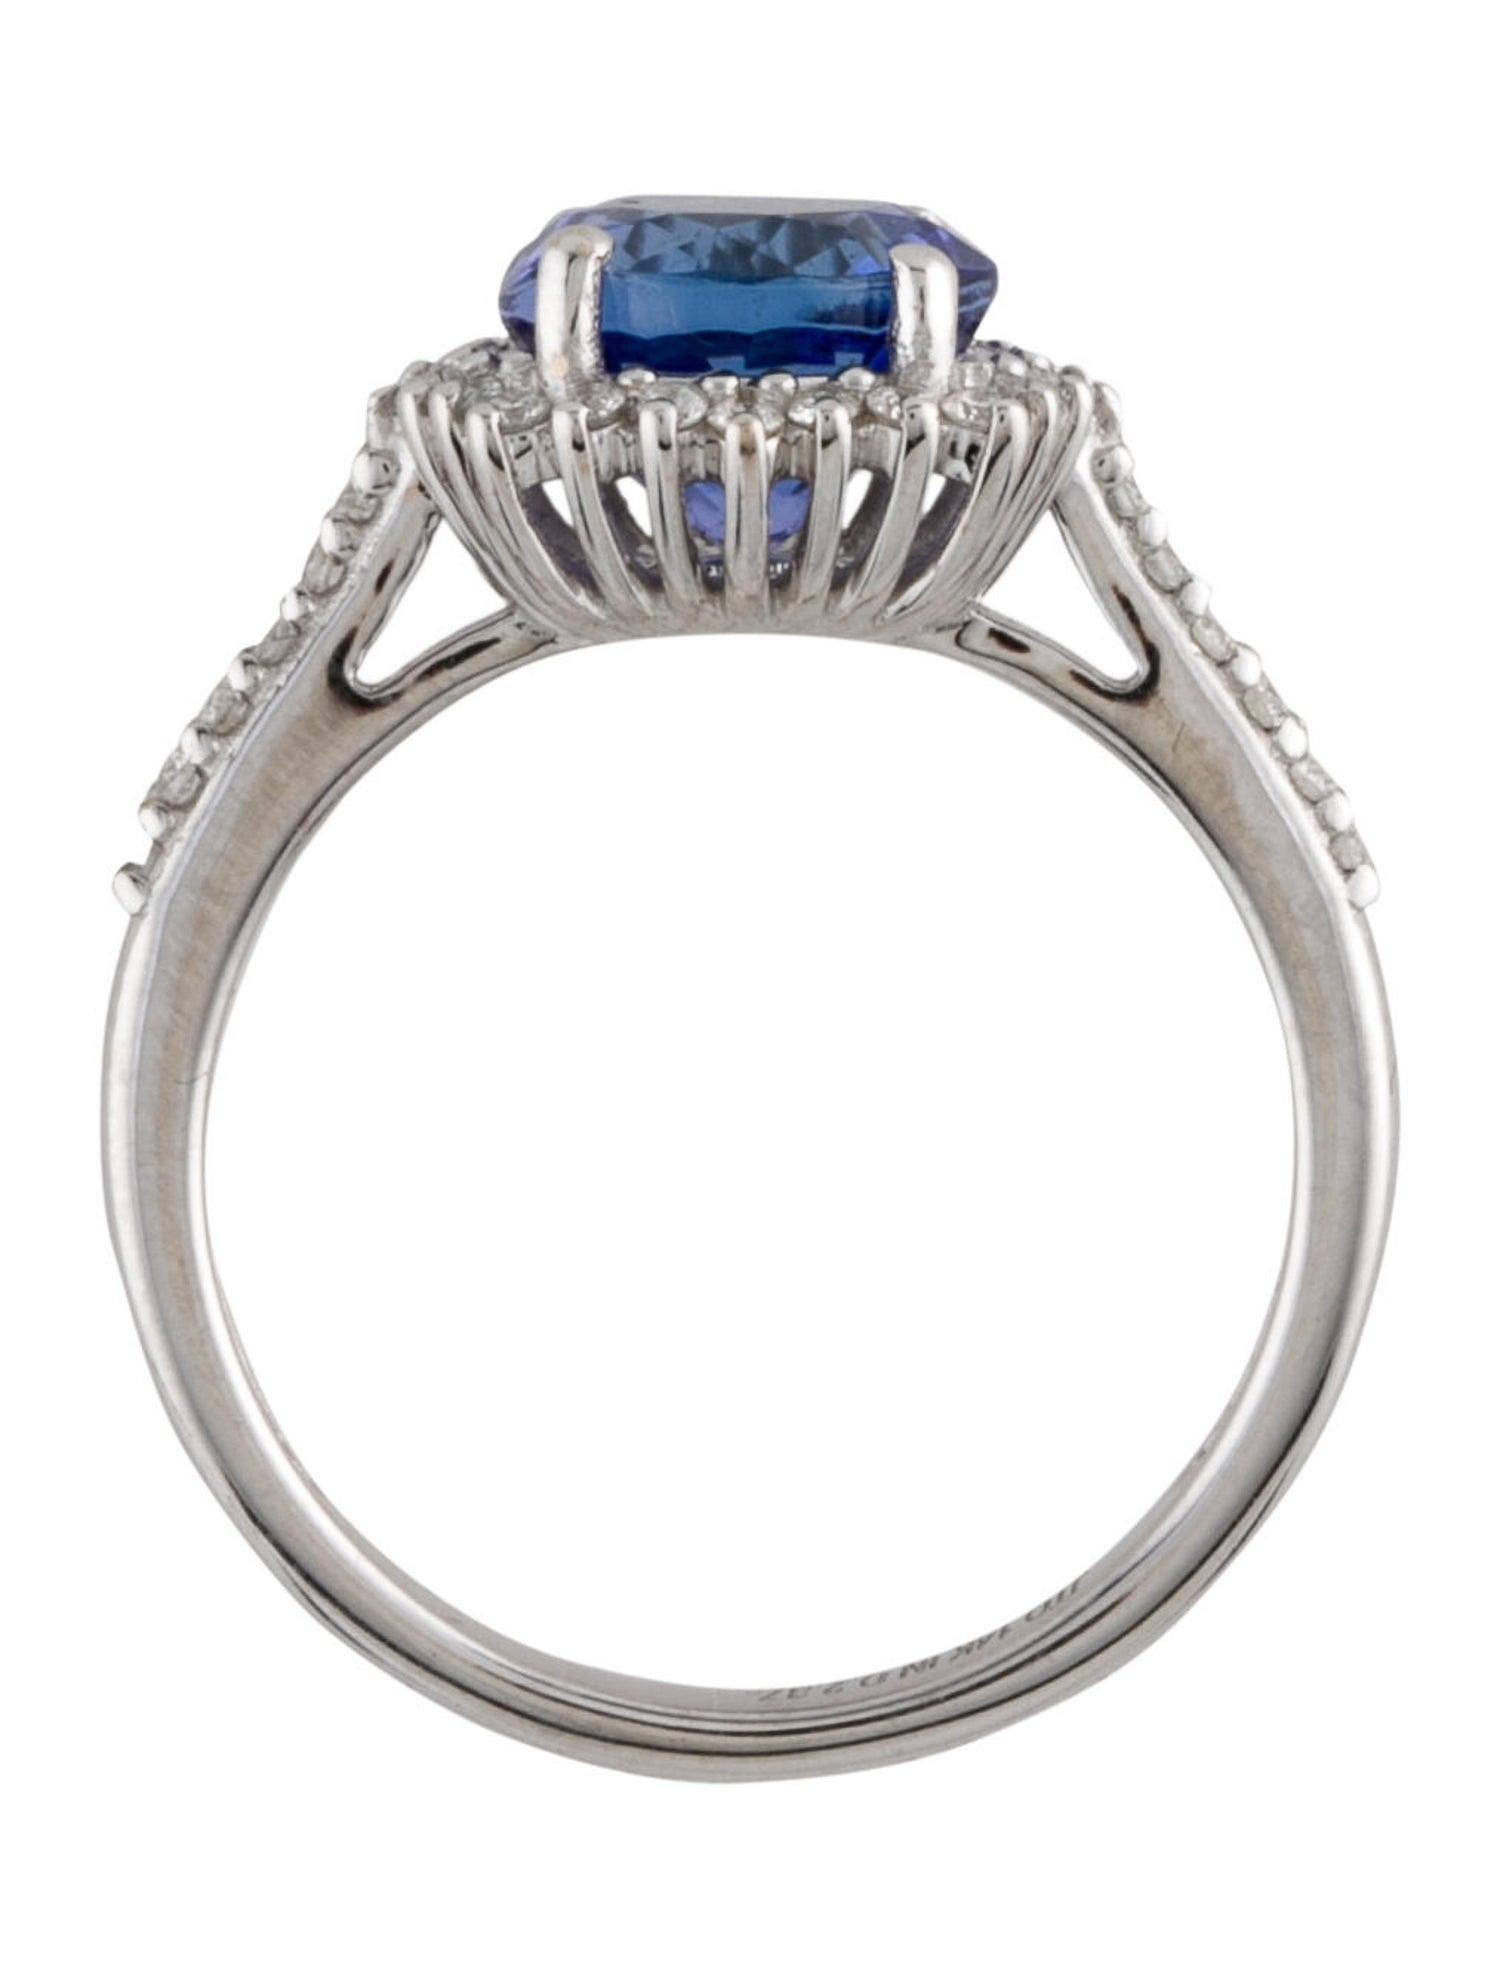 Women's Luxurious 14K White Gold Tanzanite & Diamond Cocktail Ring, 2.25ct Round Faceted For Sale